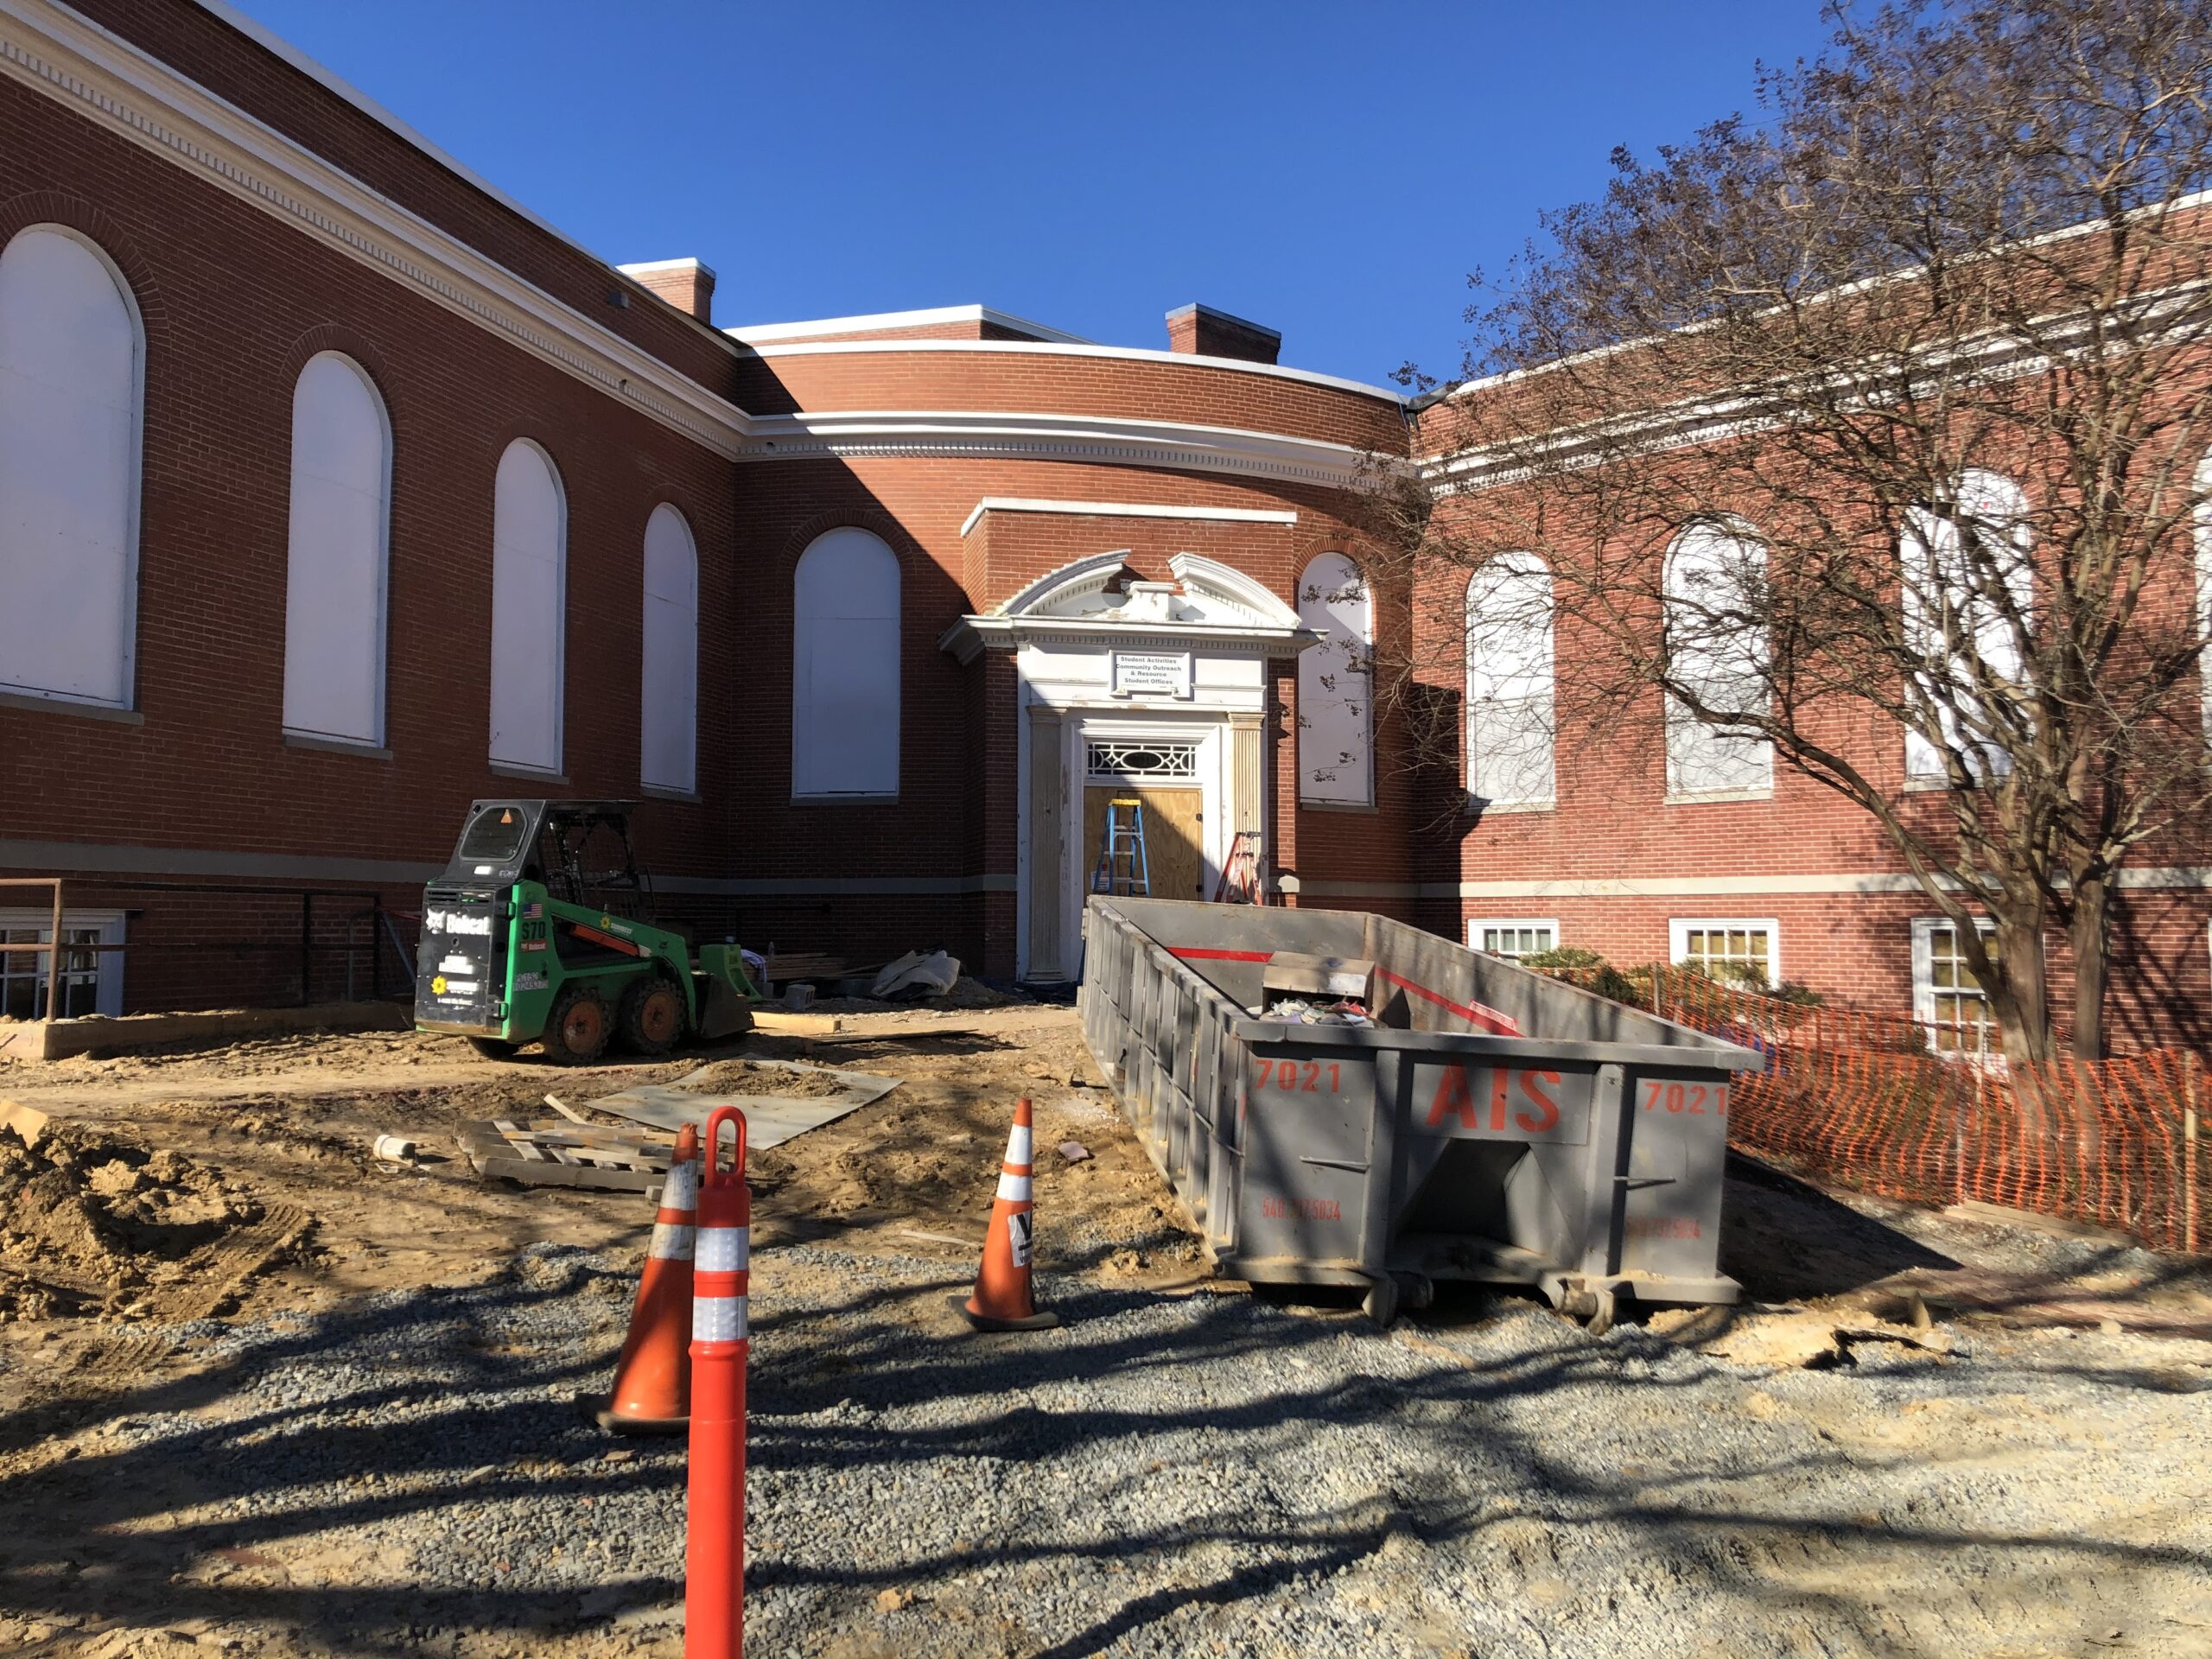 Virginia Hall and Seacobeck Hall renovations to be completed by late fall of 2021